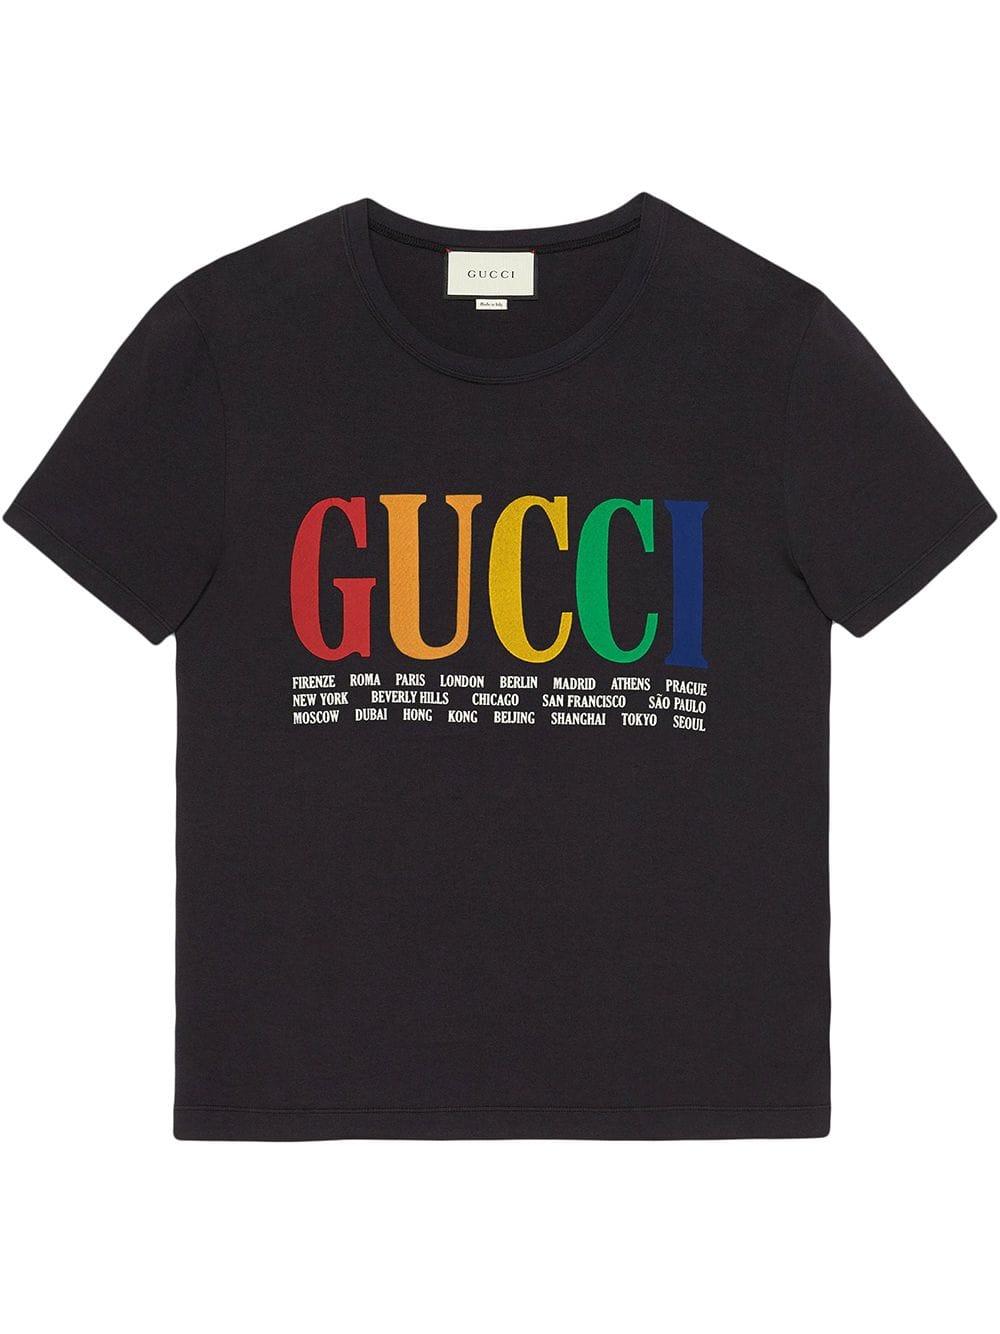 Gucci Cities Cotton T-shirt in Black for Men - Lyst